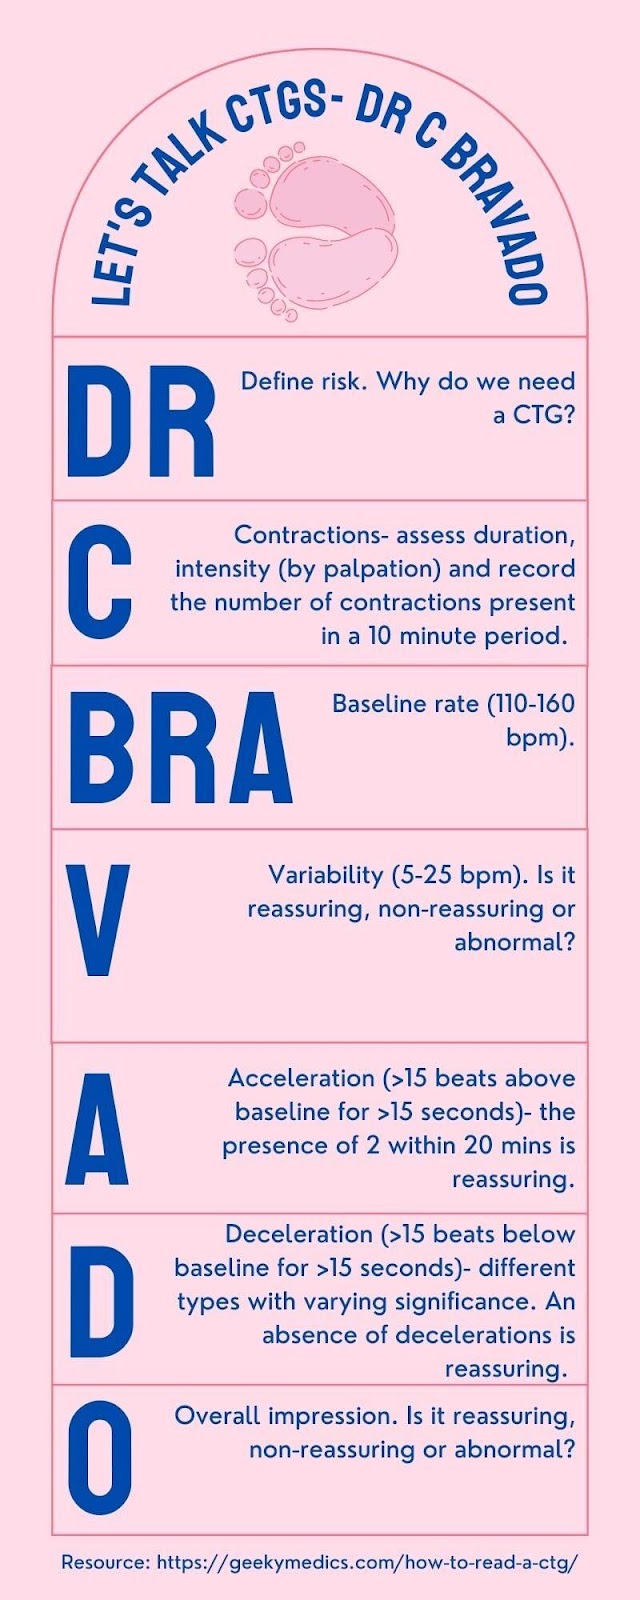 A pink and blue medical chart

Description automatically generated